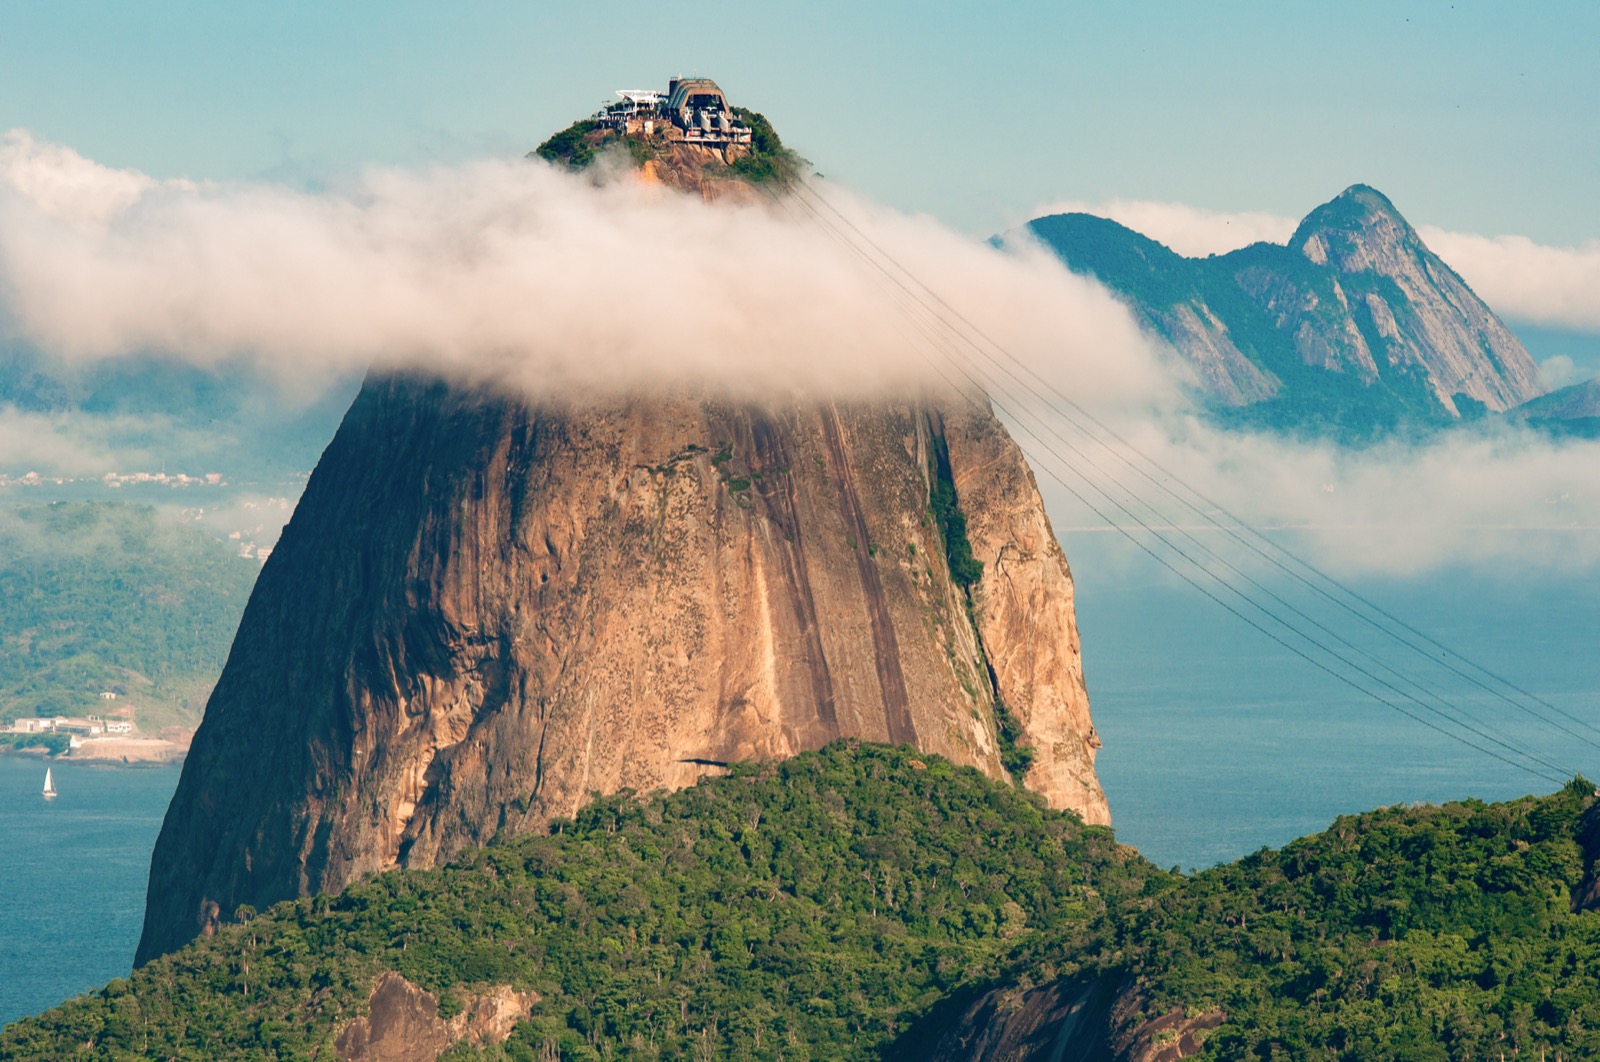 Second Most Famous Sights Sugarloaf Mountain monolith, Rio de Janeiro, Brazil